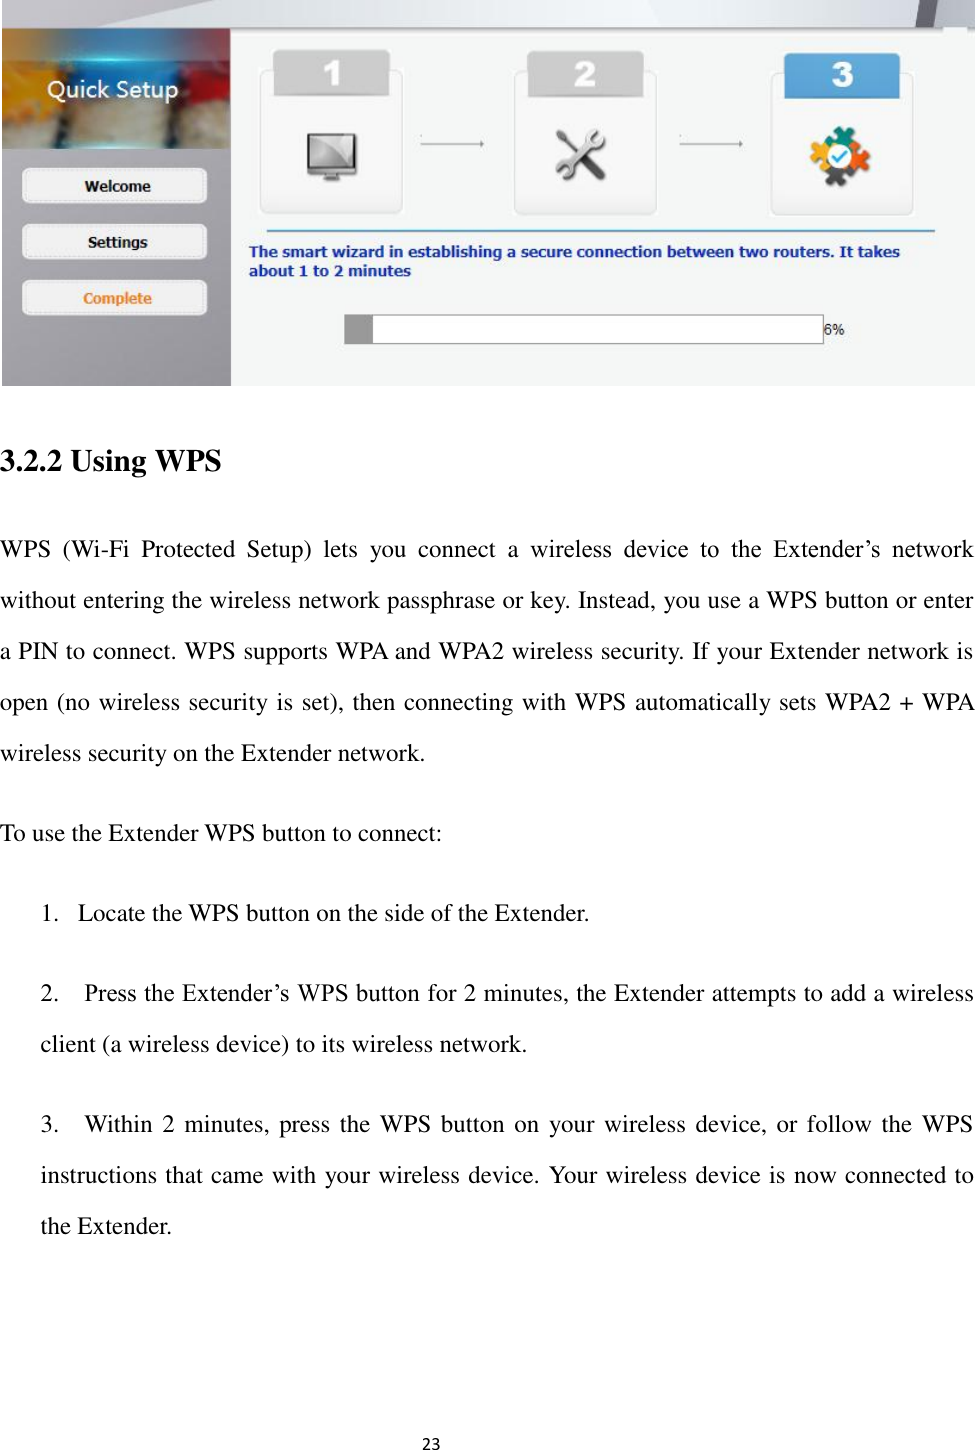                                                               23                                                      3.2.2 Using WPS   WPS  (Wi-Fi  Protected  Setup)  lets  you  connect  a  wireless  device  to  the  Extender’s  network without entering the wireless network passphrase or key. Instead, you use a WPS button or enter a PIN to connect. WPS supports WPA and WPA2 wireless security. If your Extender network is open (no wireless security is set), then connecting with WPS automatically sets WPA2 + WPA wireless security on the Extender network. To use the Extender WPS button to connect: 1. Locate the WPS button on the side of the Extender. 2.    Press the Extender’s WPS button for 2 minutes, the Extender attempts to add a wireless client (a wireless device) to its wireless network. 3.    Within 2 minutes, press the WPS button on  your wireless device, or follow the WPS instructions that came with your wireless device. Your wireless device is now connected to the Extender. 